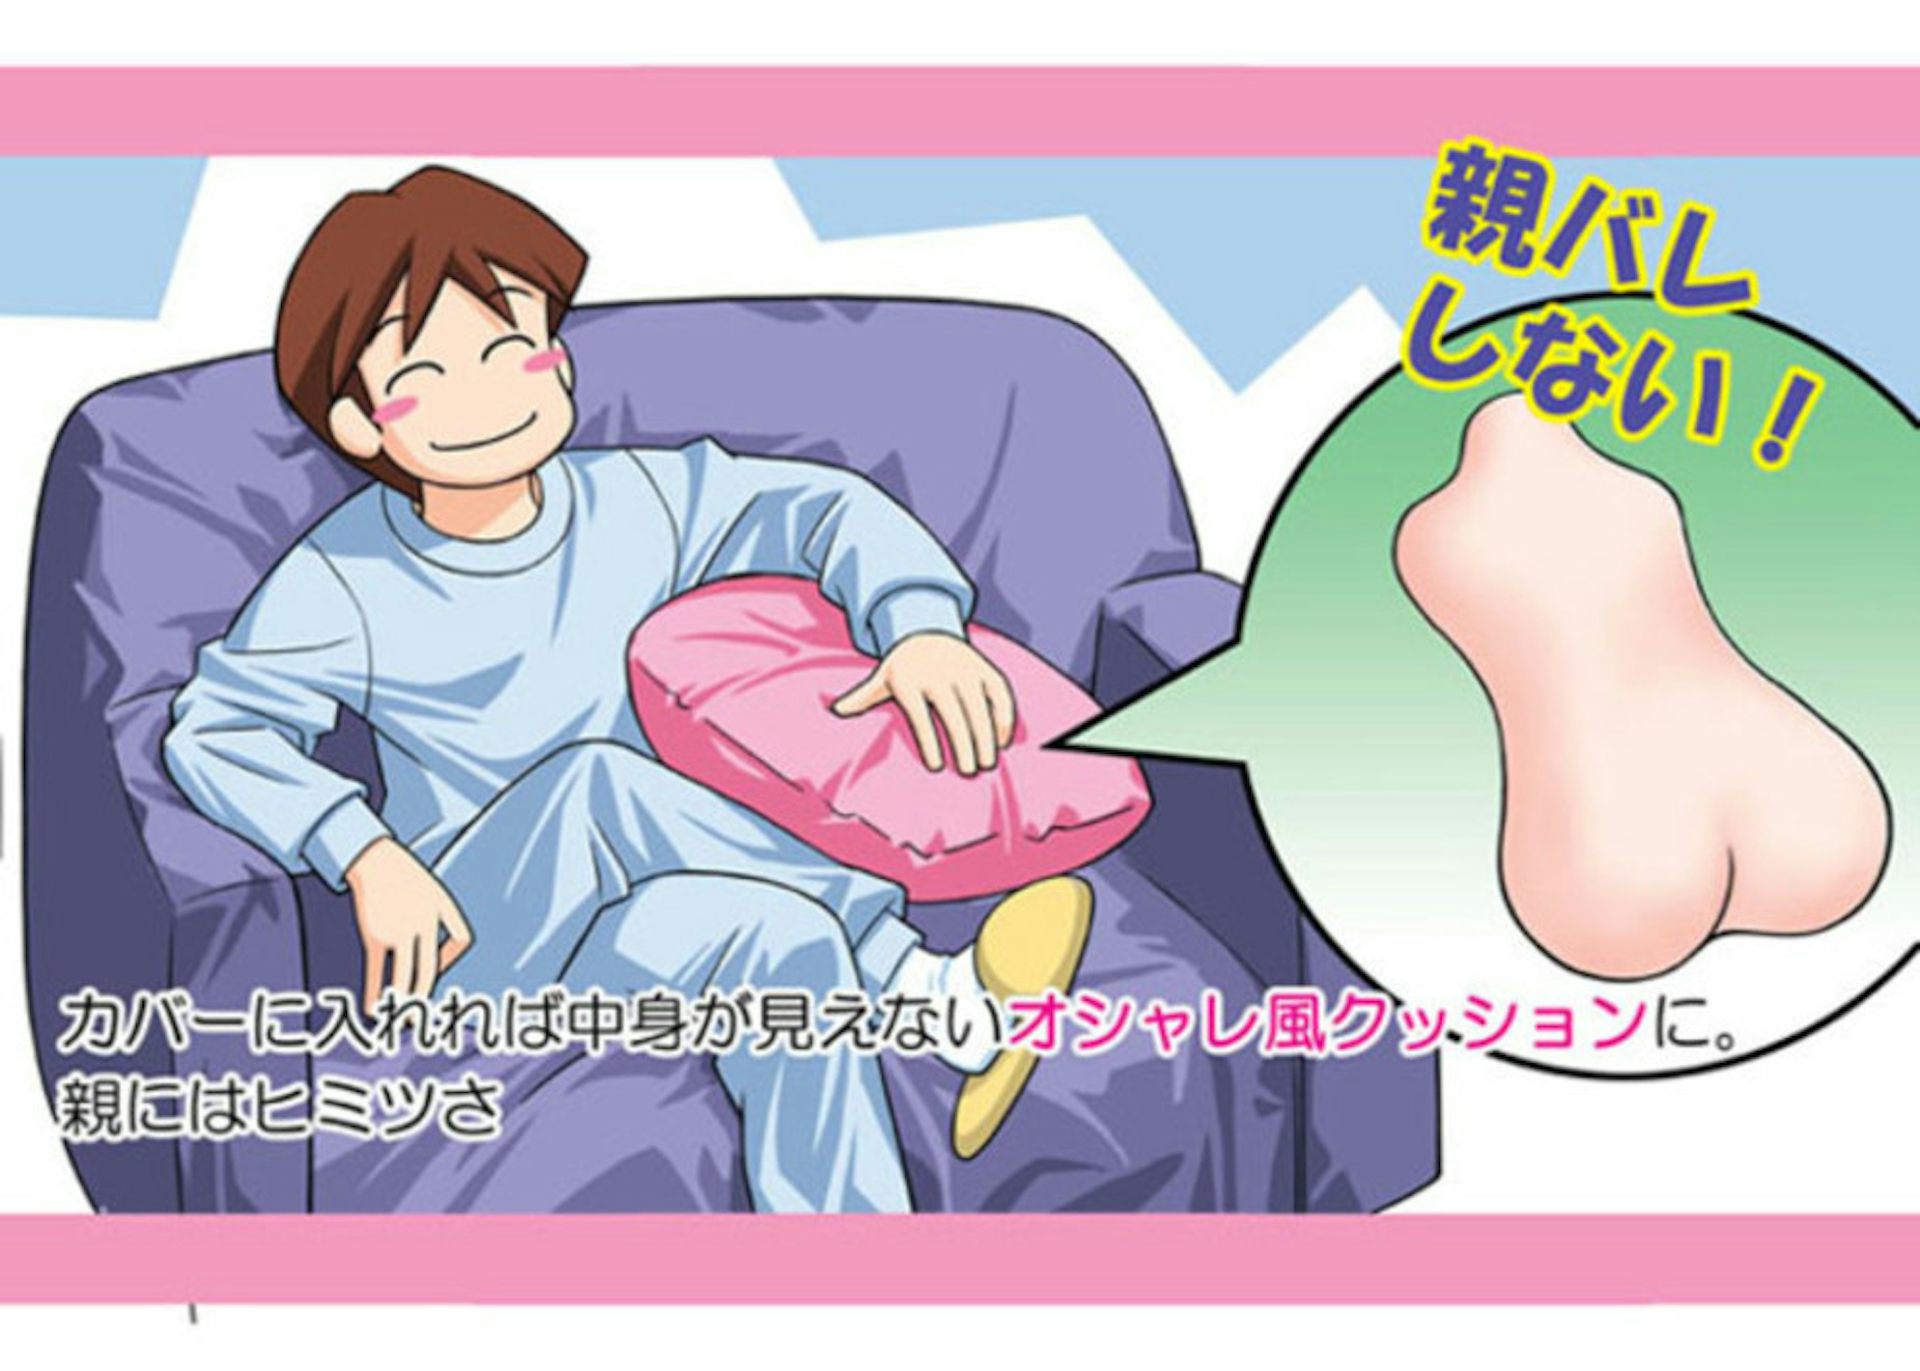 In Japan, pillows can be a sex partner image